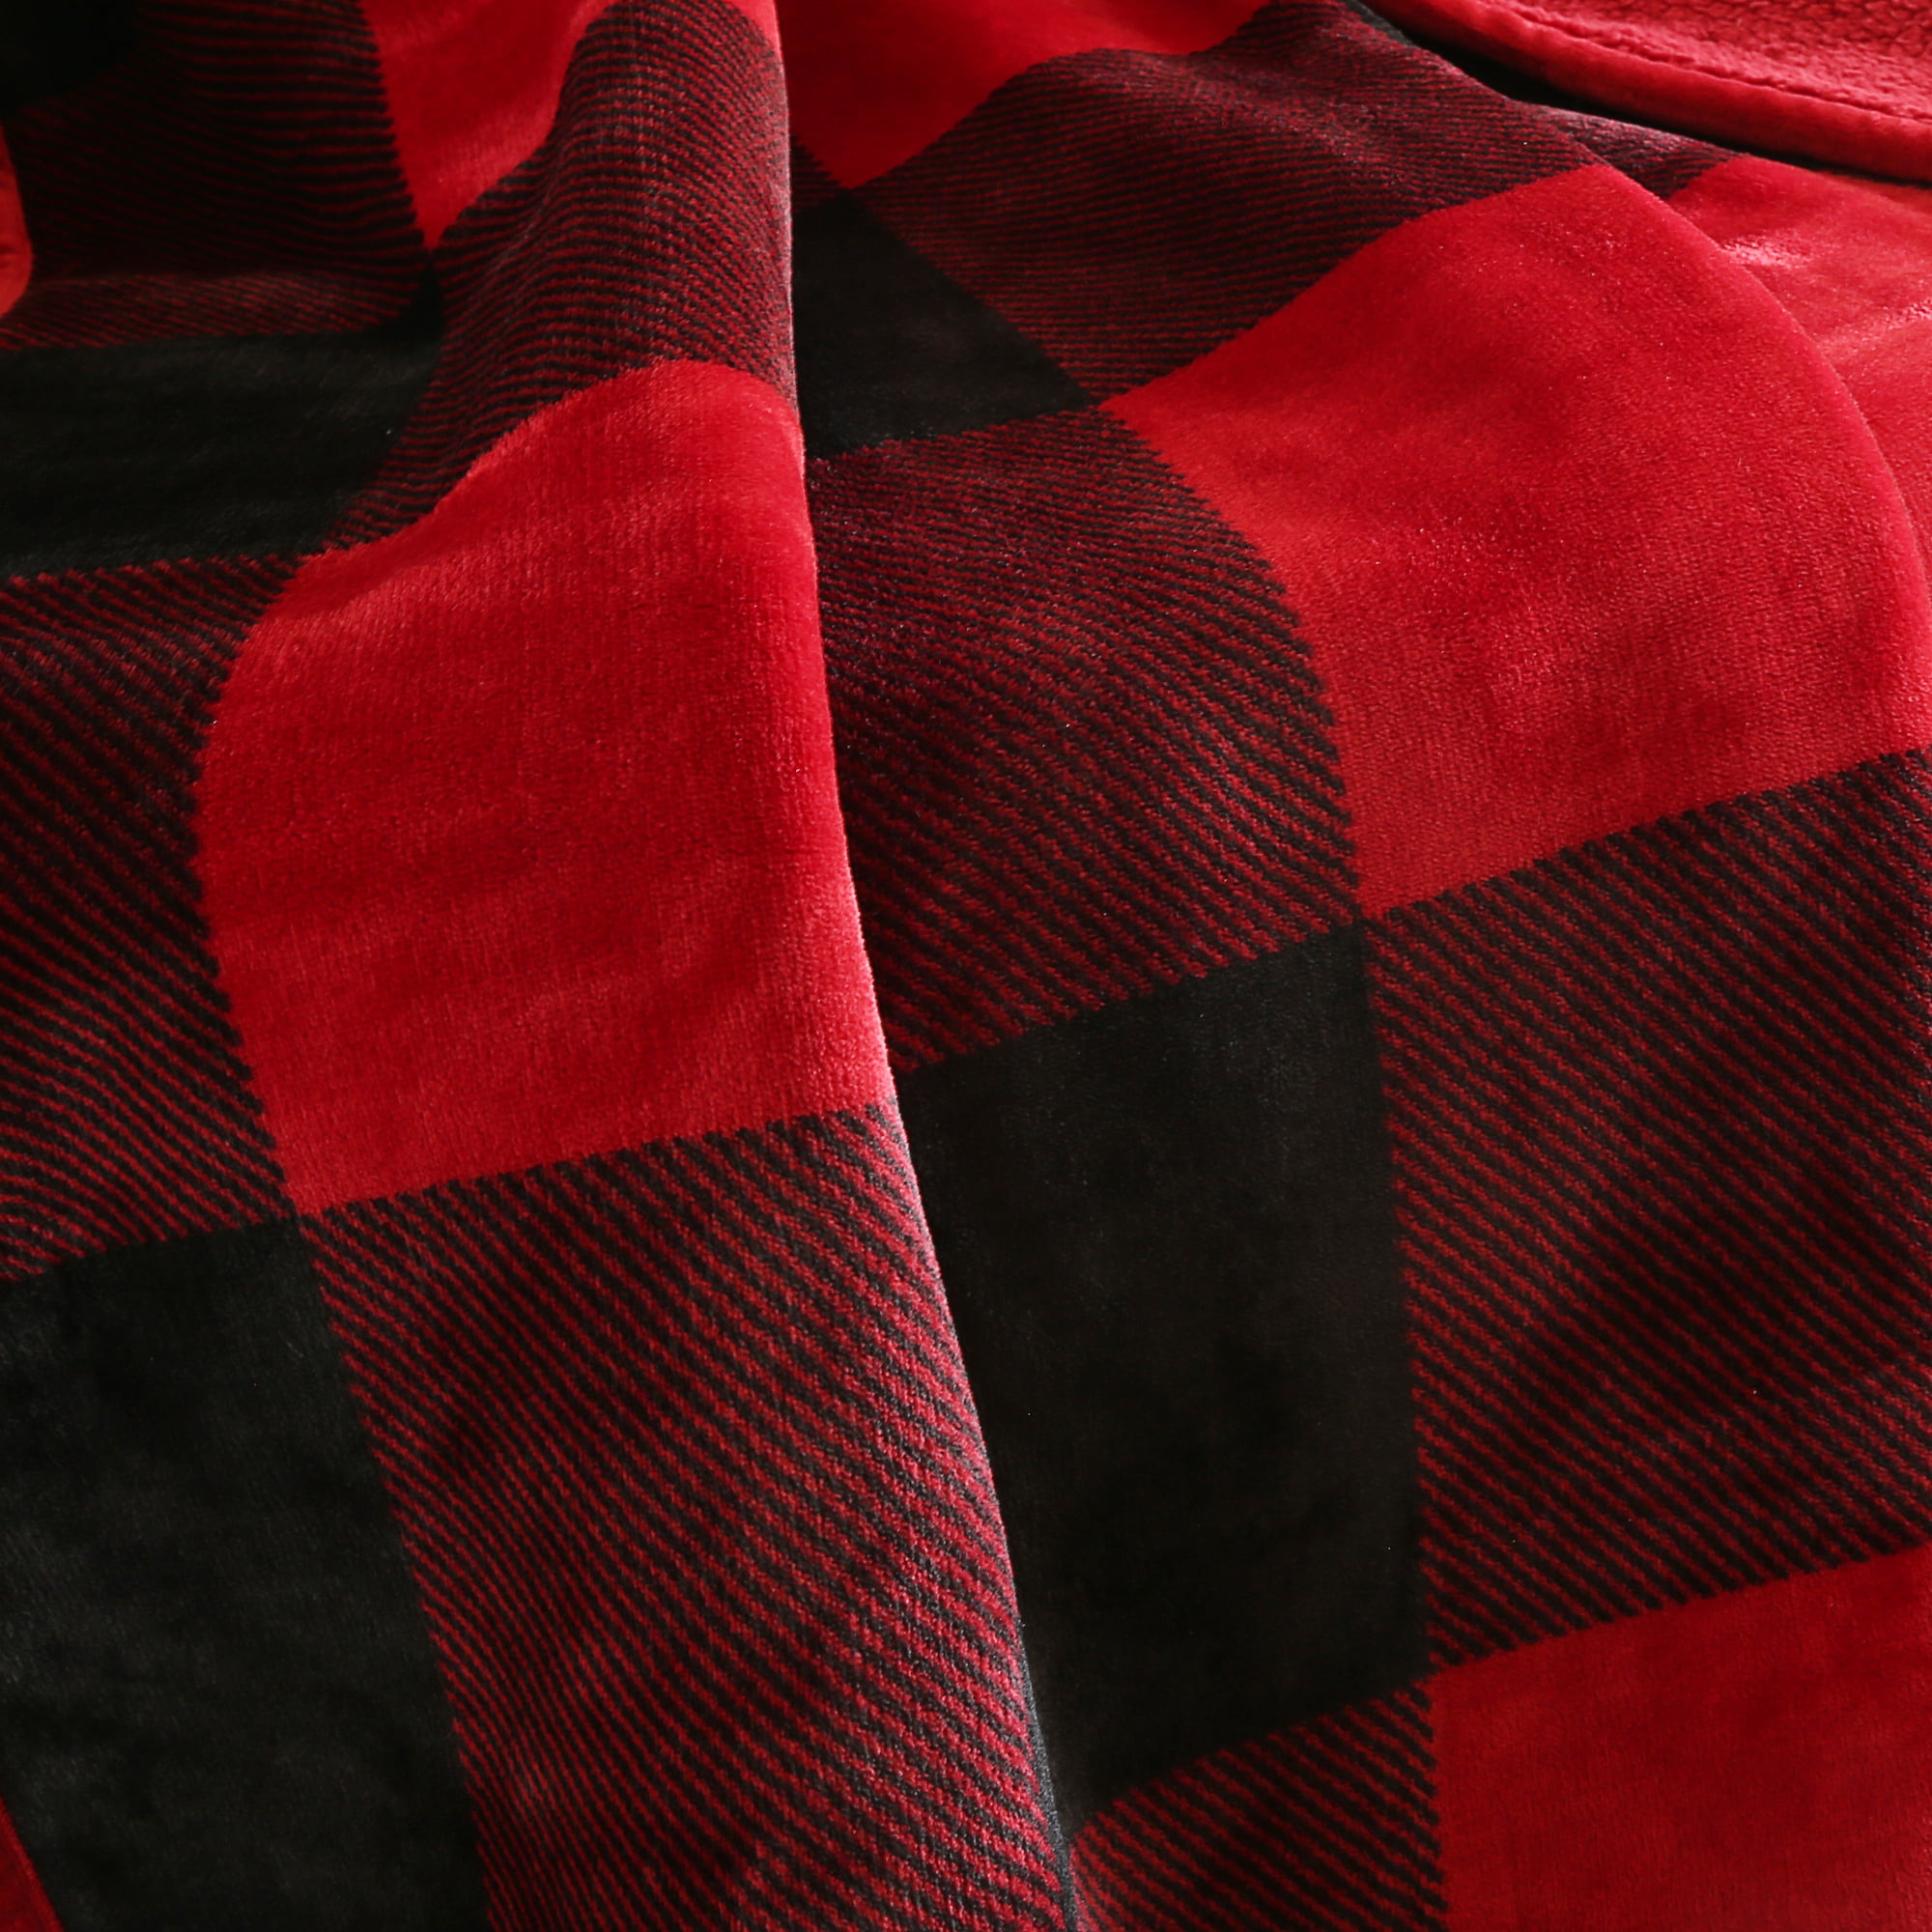 Better Homes & Gardens Oversized Sherpa Throw, 50 x 72, Red Buffalo Plaid  